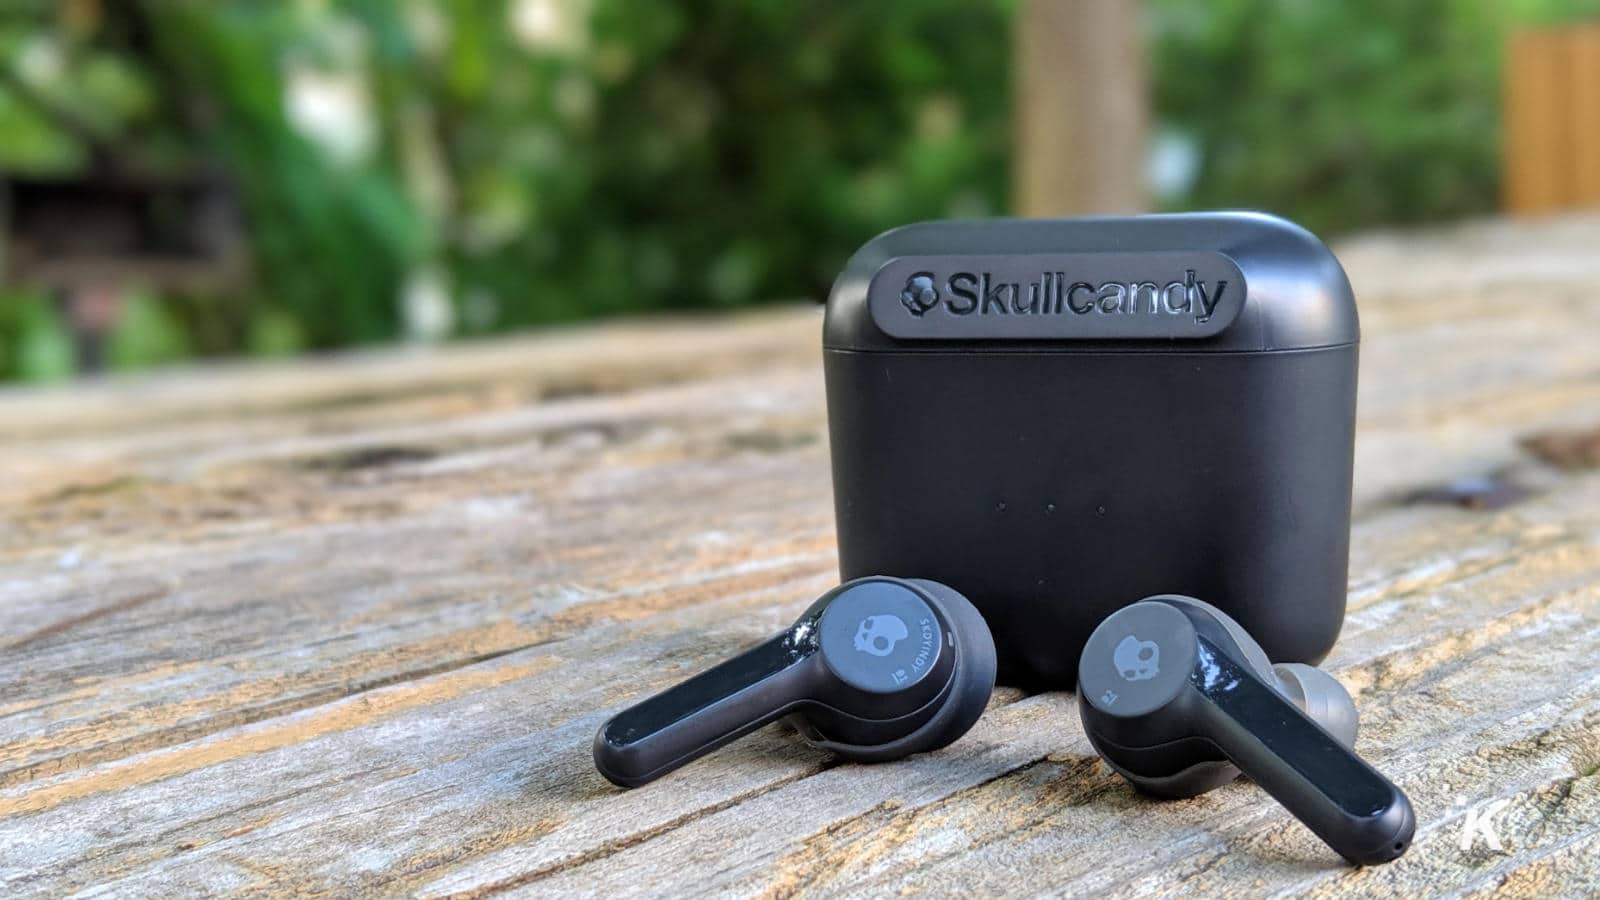 How To Pair Skullcandy Wireless Earbuds Indy